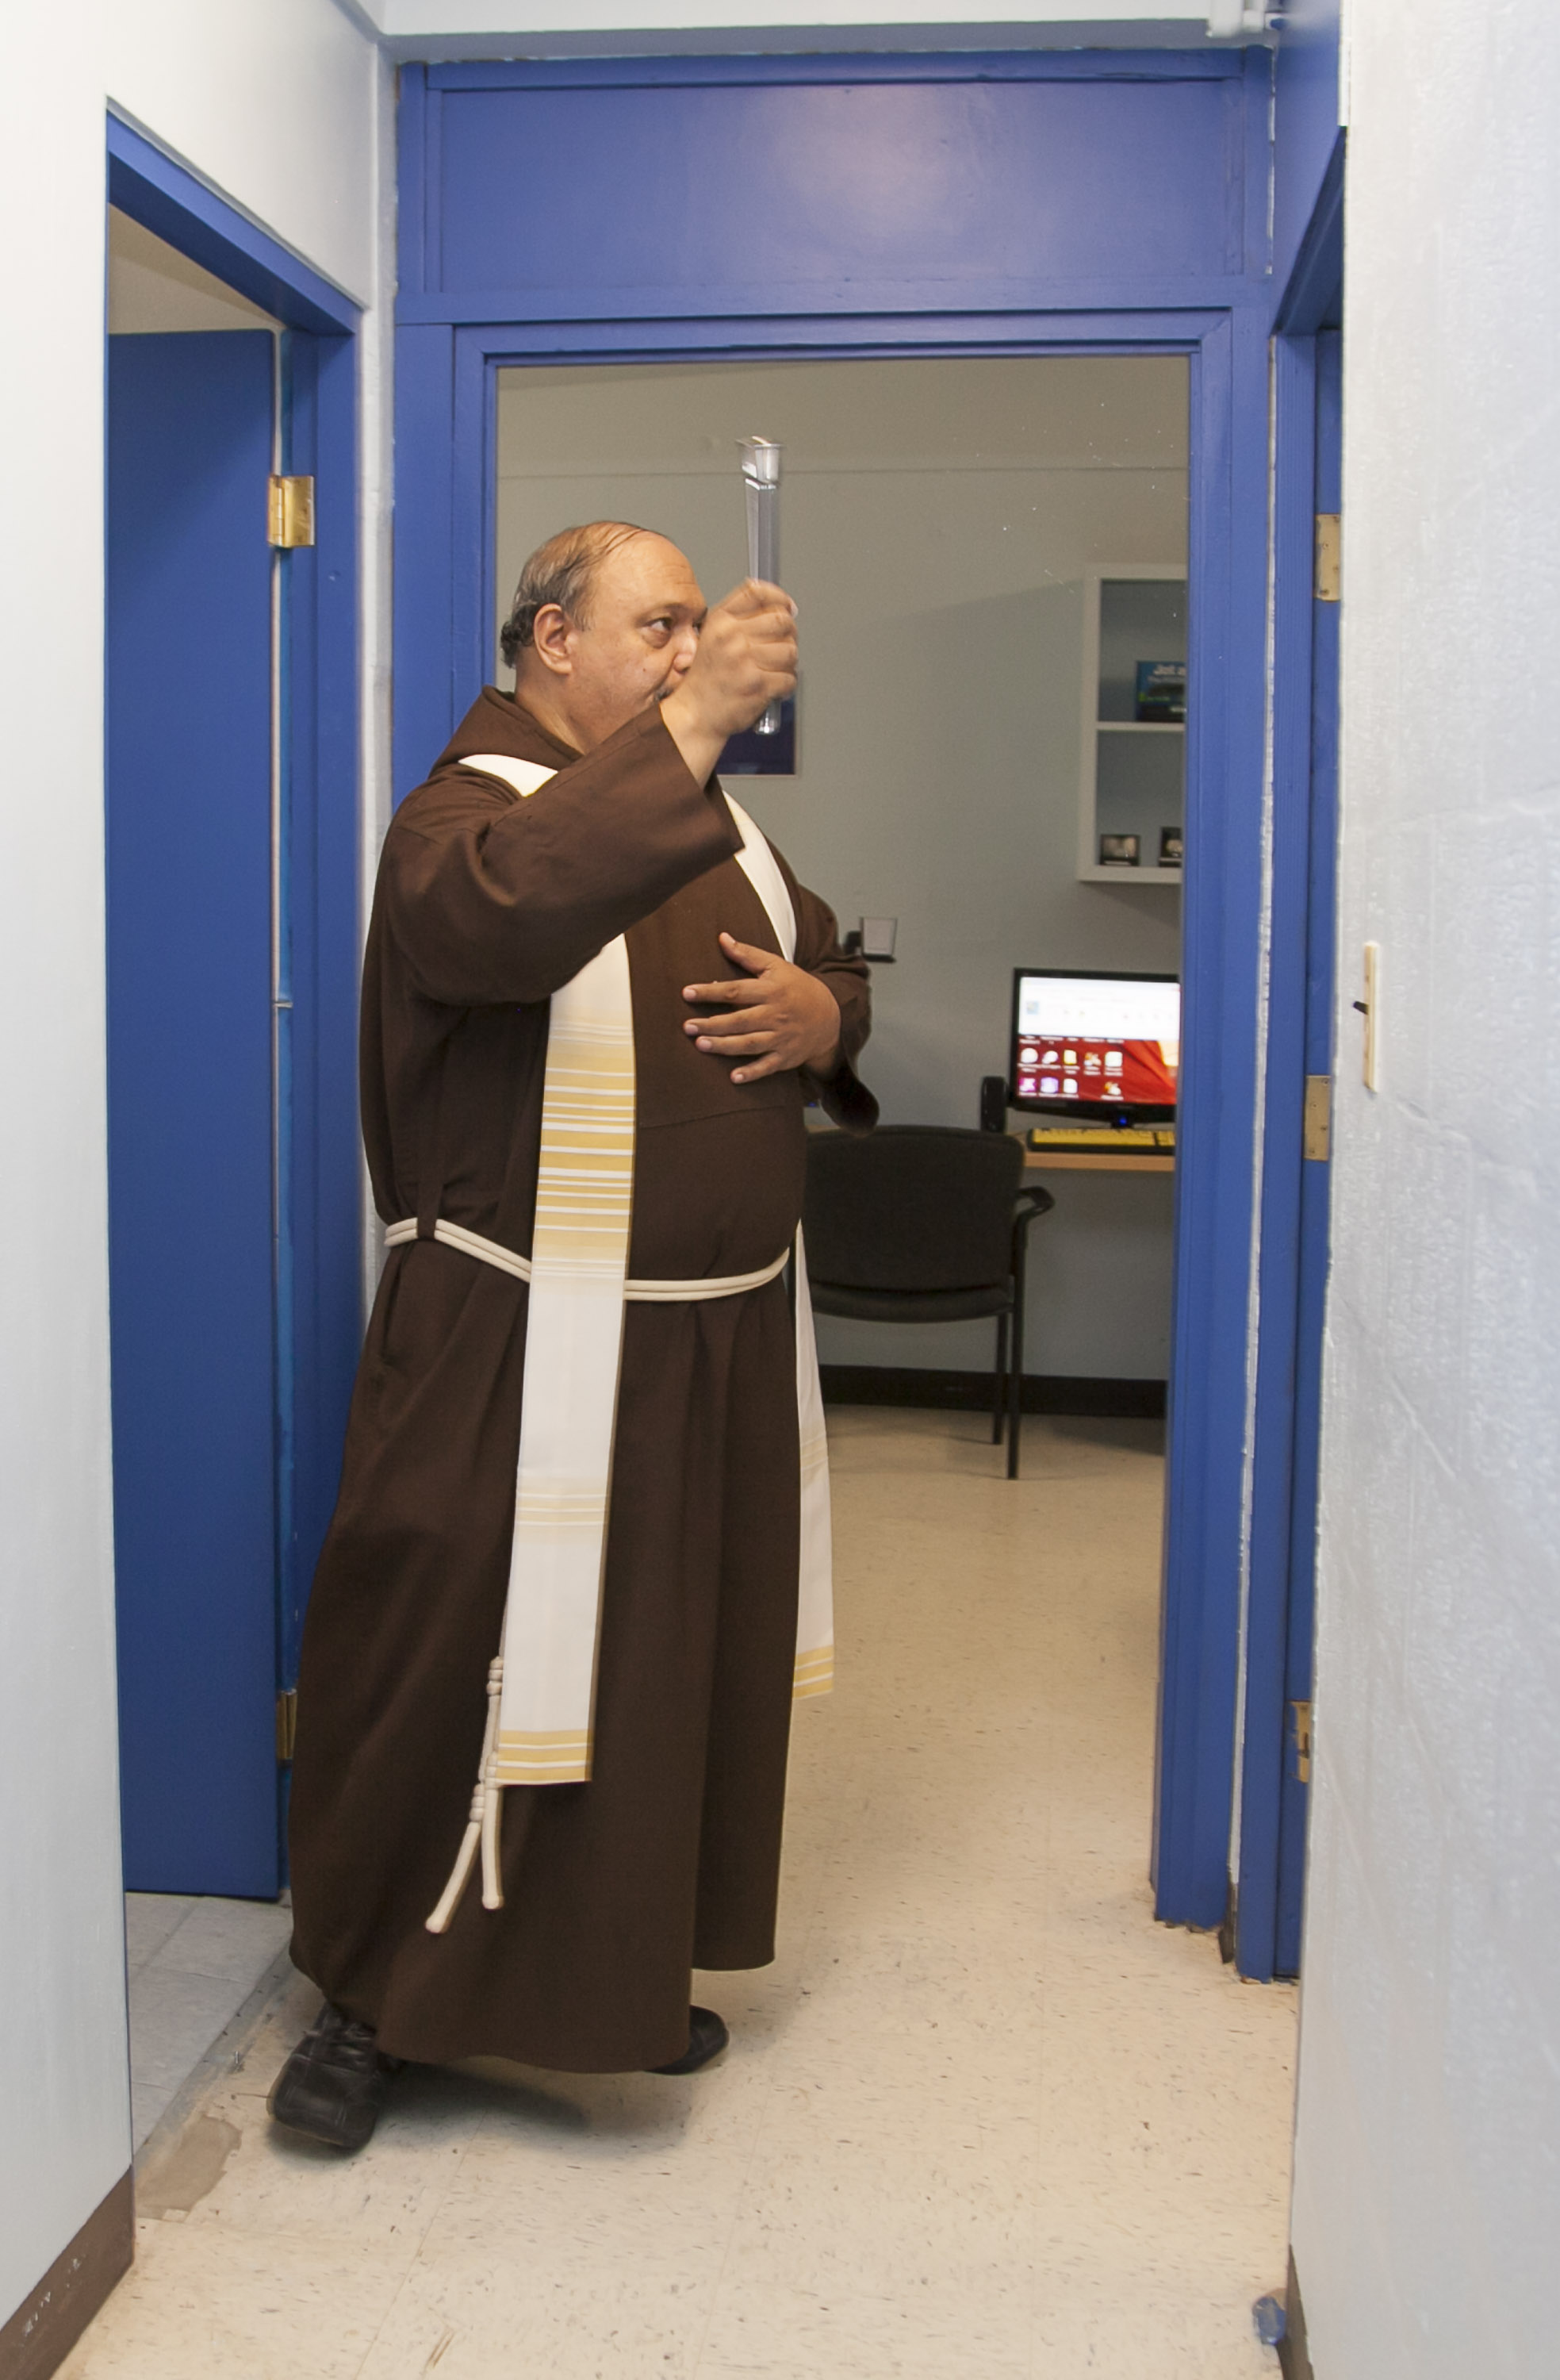 Reverend Father Joseph English, OFM Cap., led the blessing of the newly renovated AT Demonstration Center.